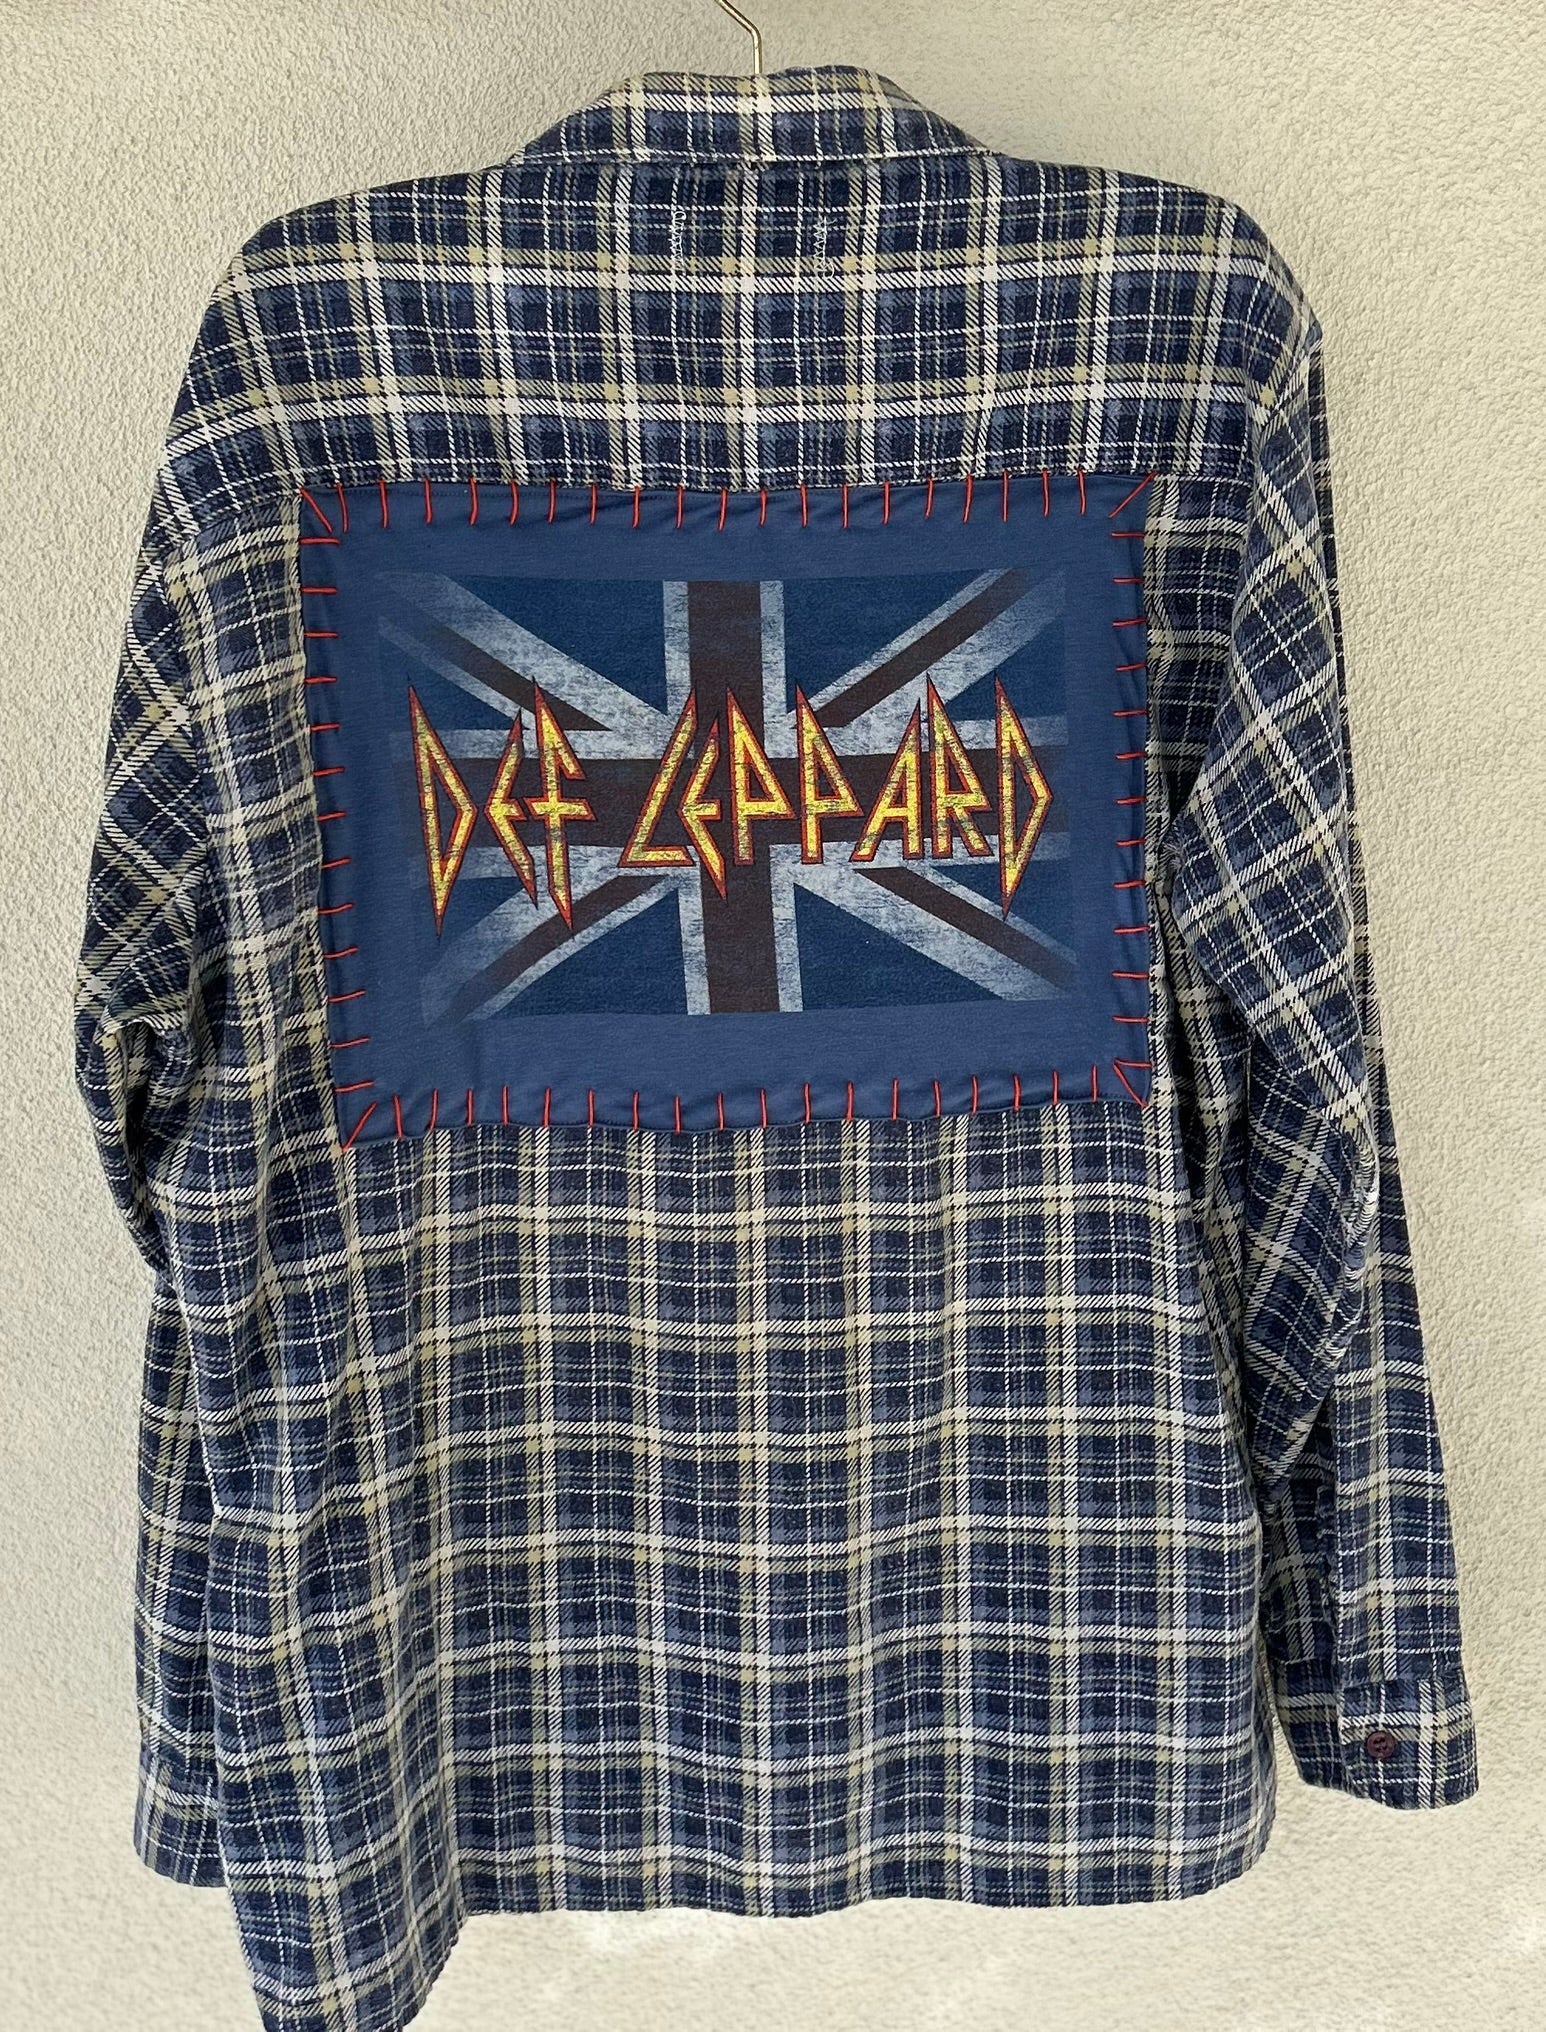 Def Leppard Upcycled Flannel